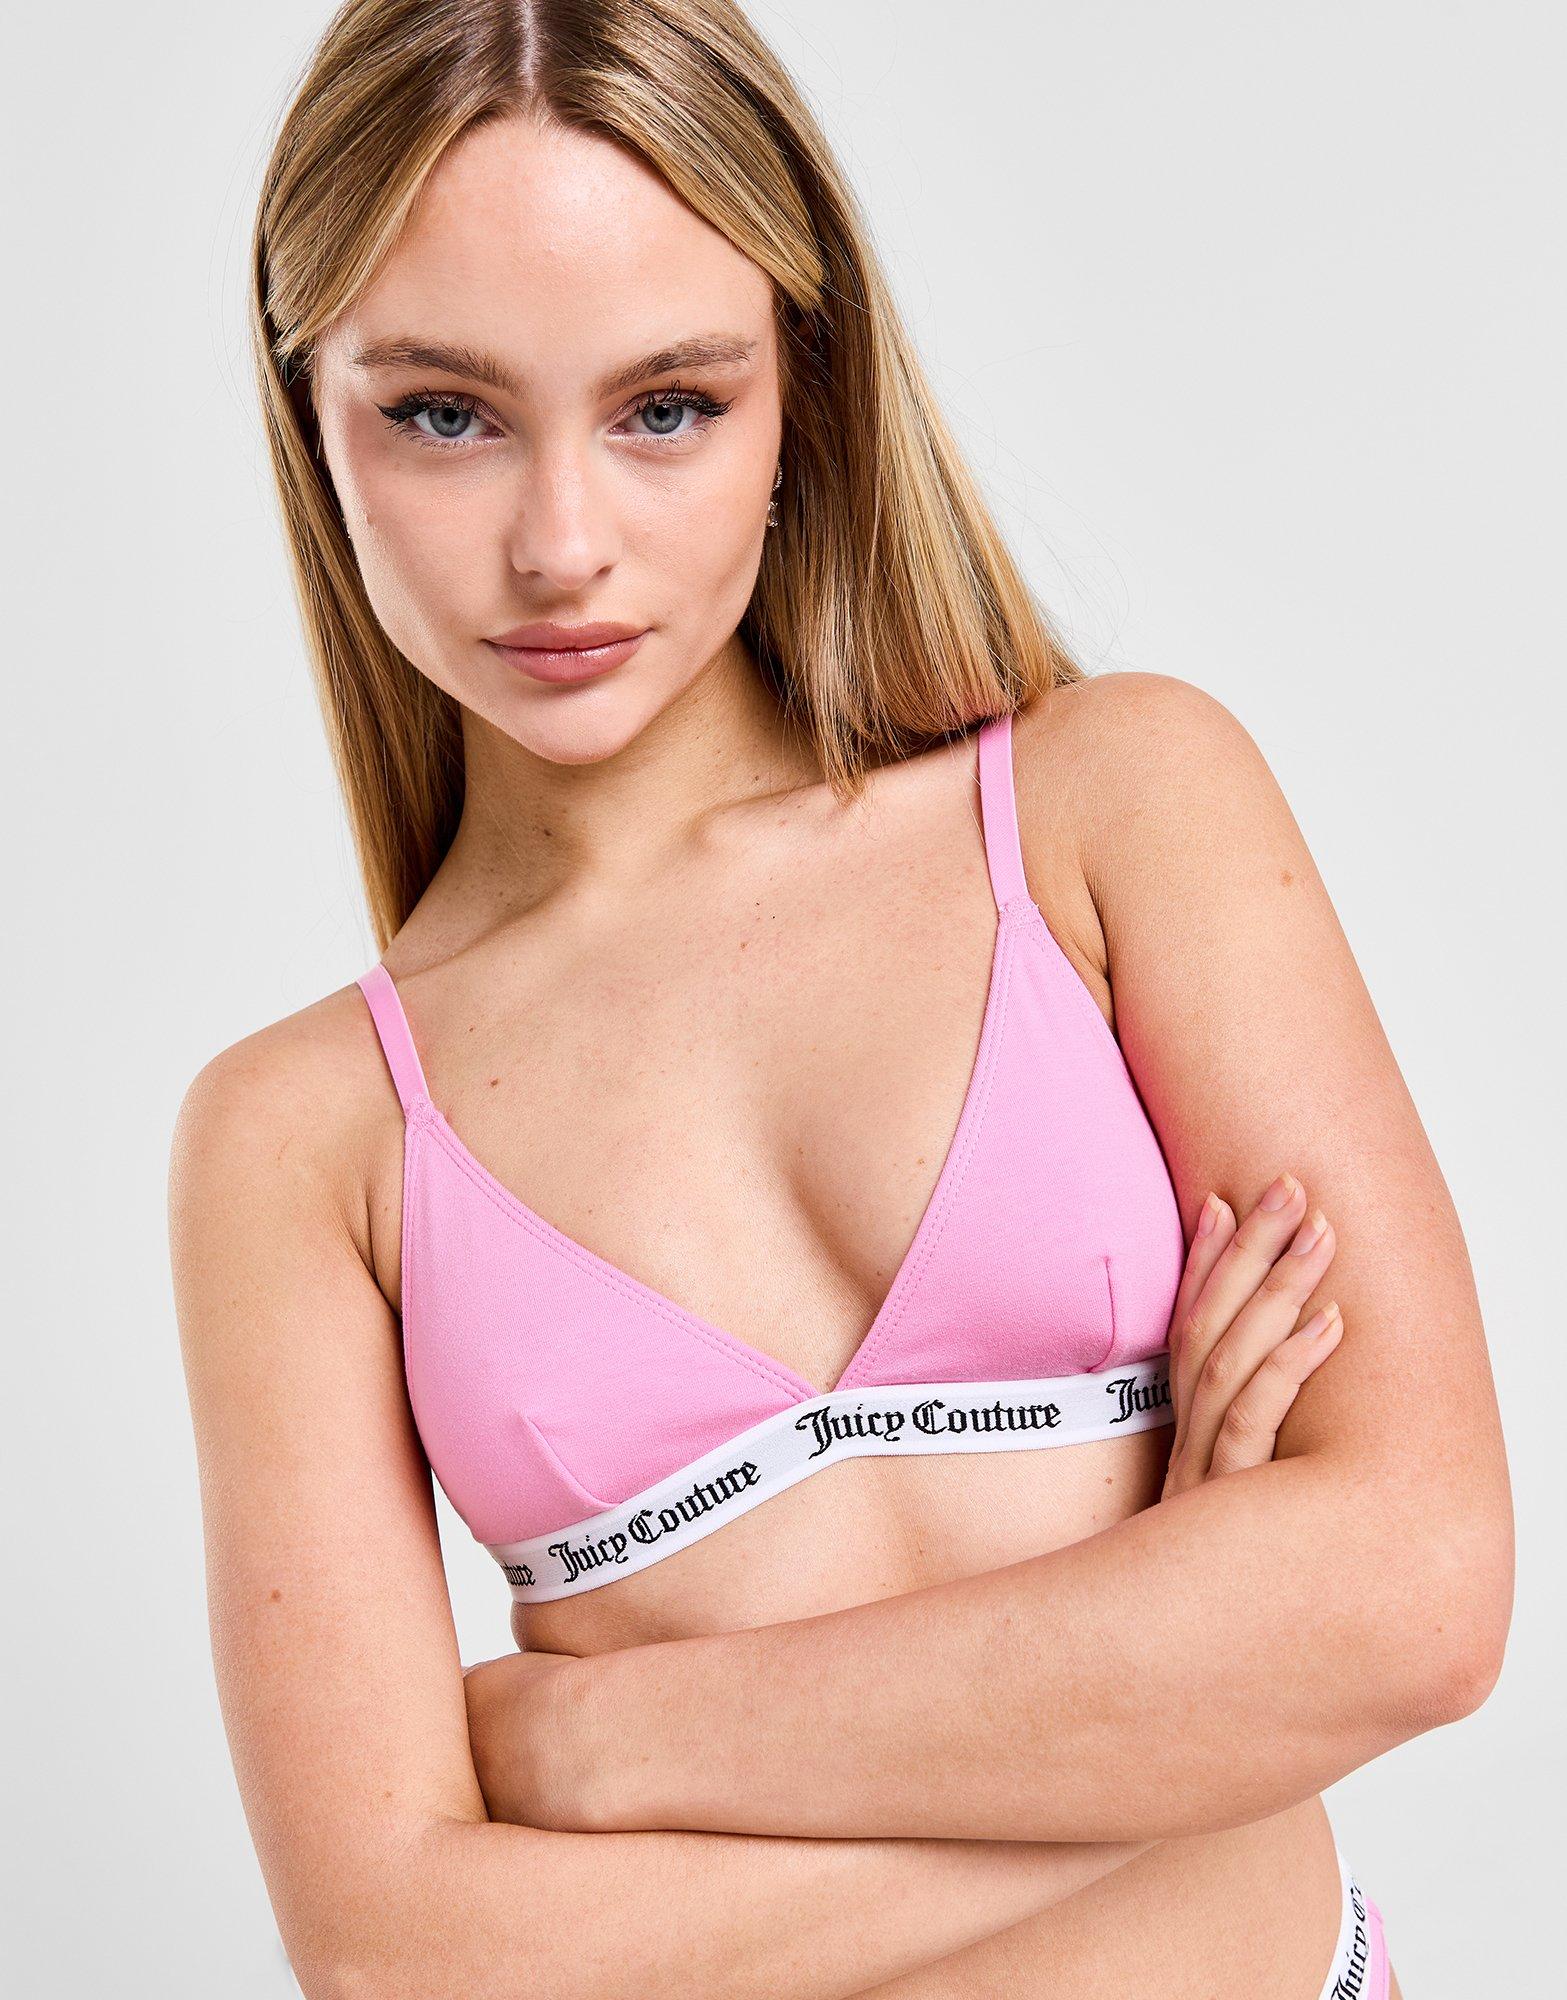 Shop LC Women JUICY COUTURE Pink Color Big Logo Sports Bra and